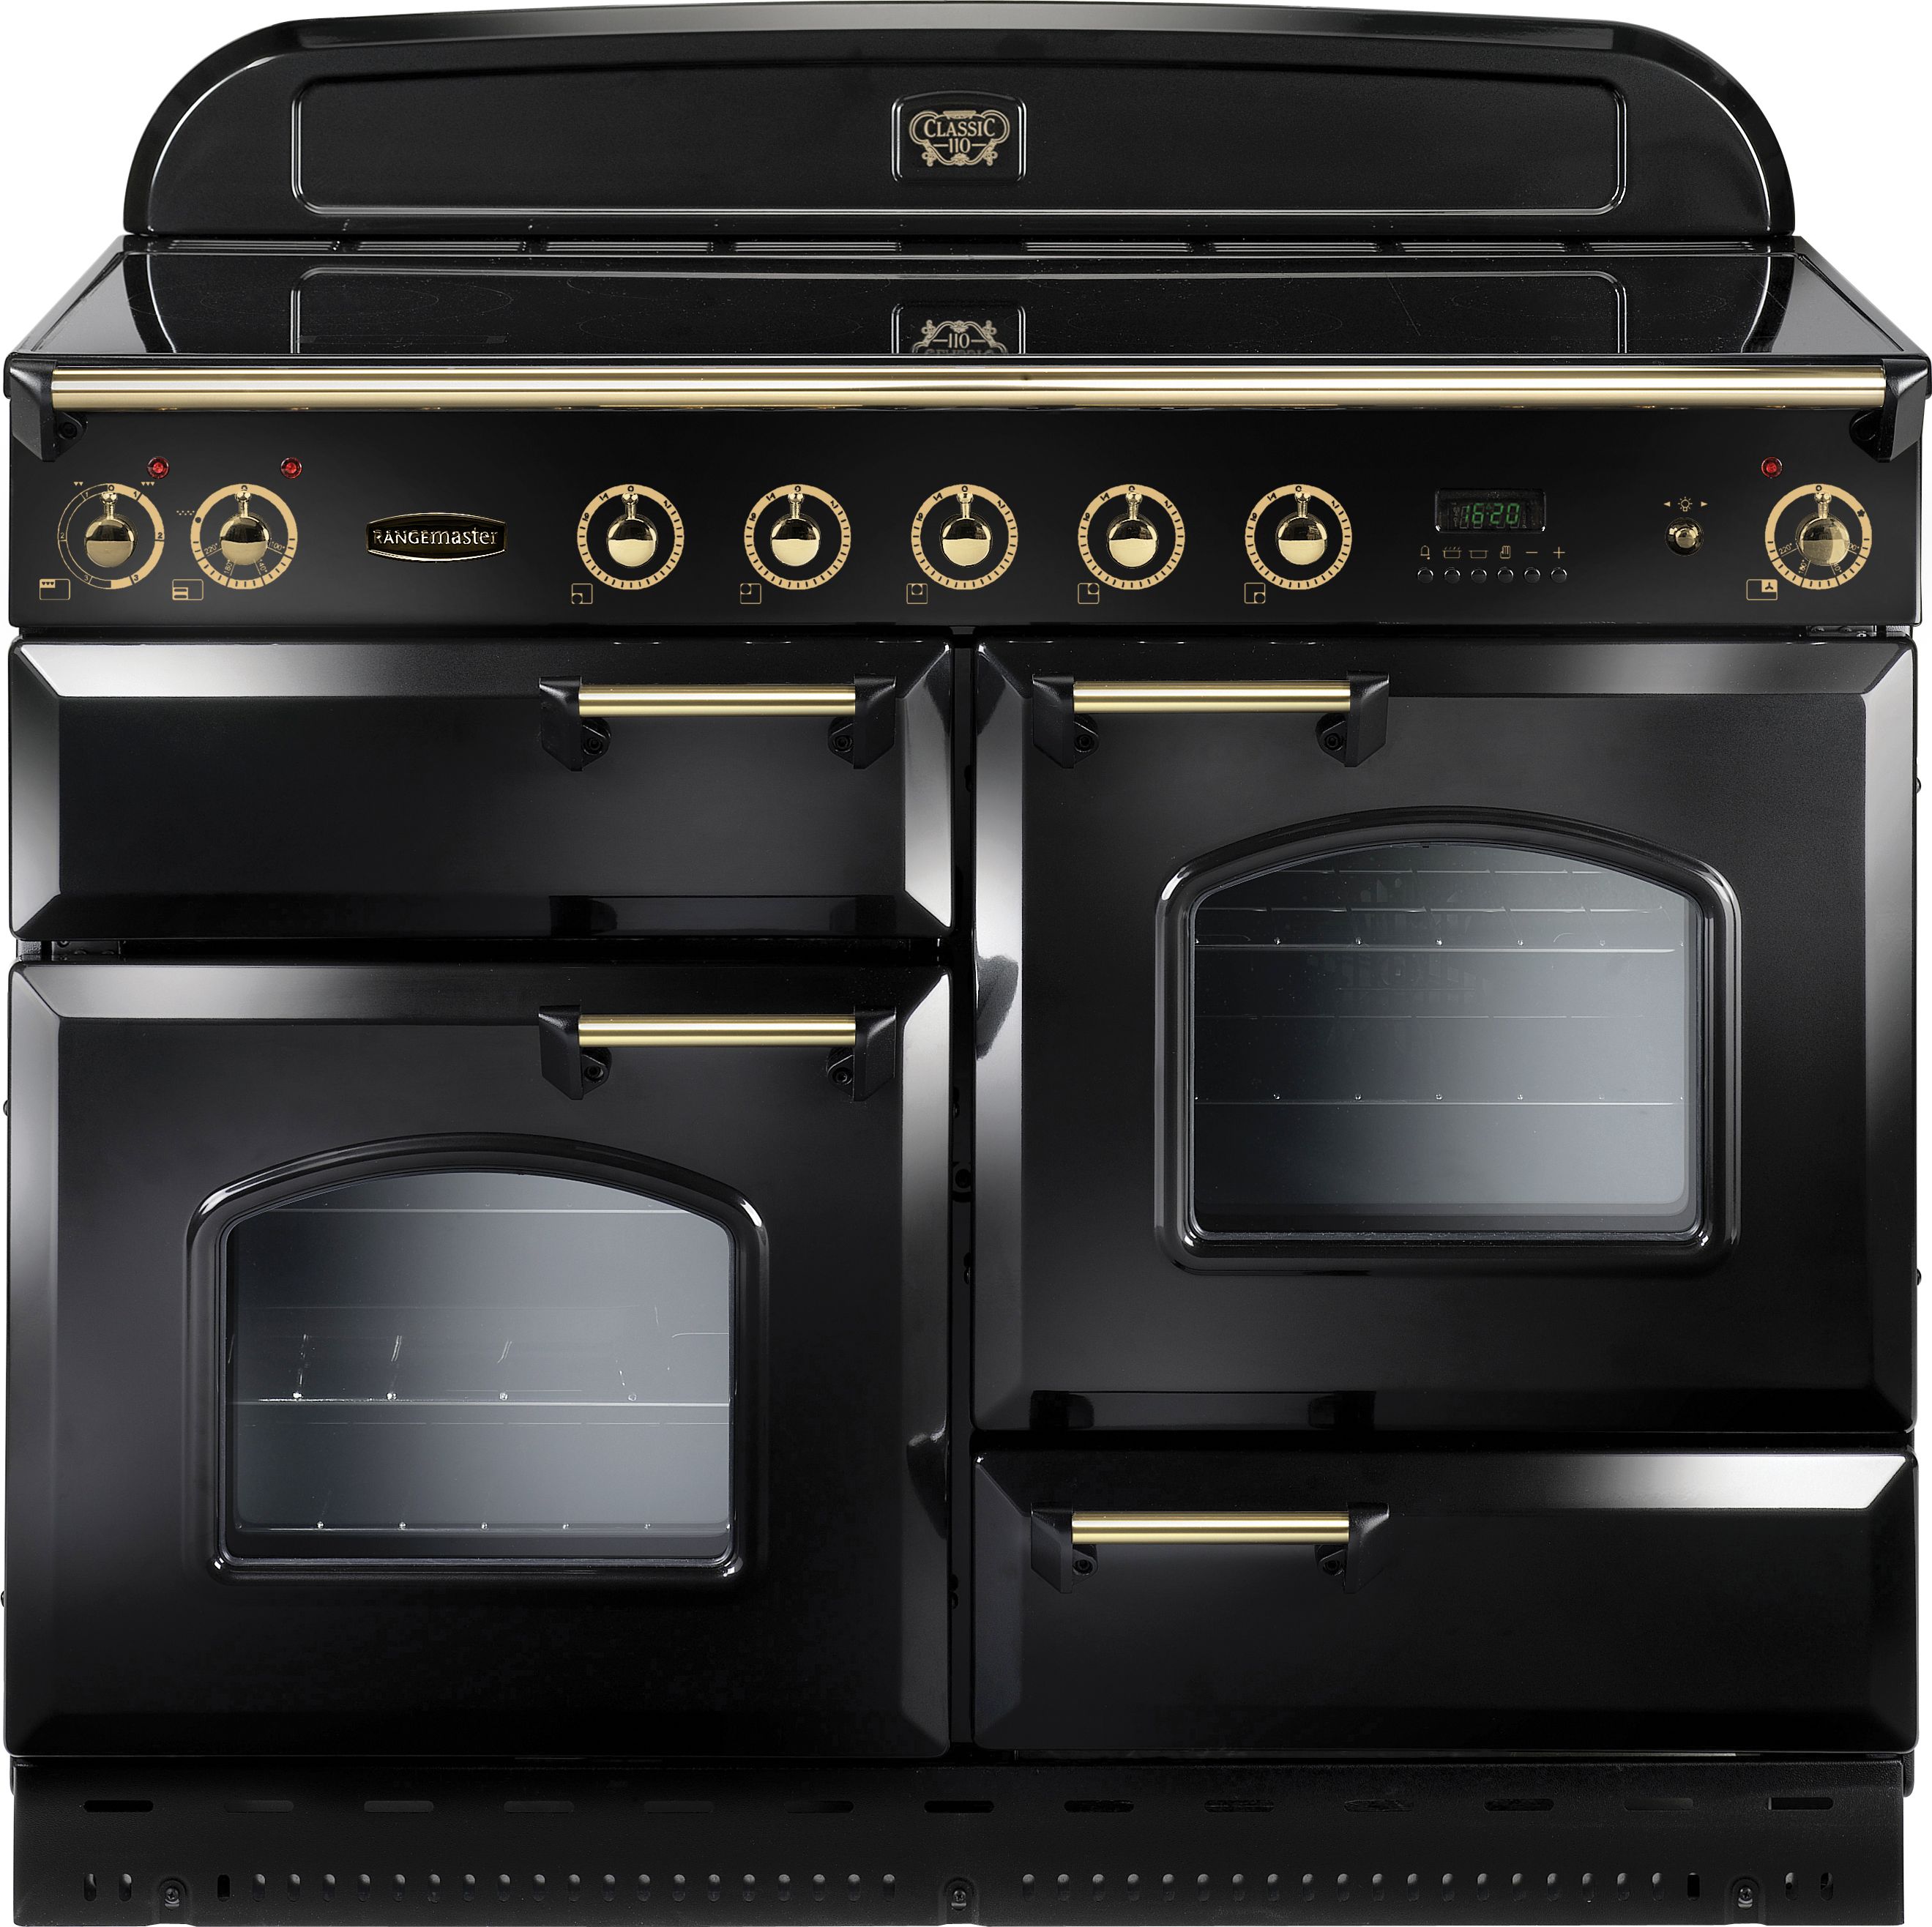 Rangemaster Classic Deluxe CDL110EIBL/B 110cm Electric Range Cooker with Induction Hob - Black / Brass - A/A Rated, Black